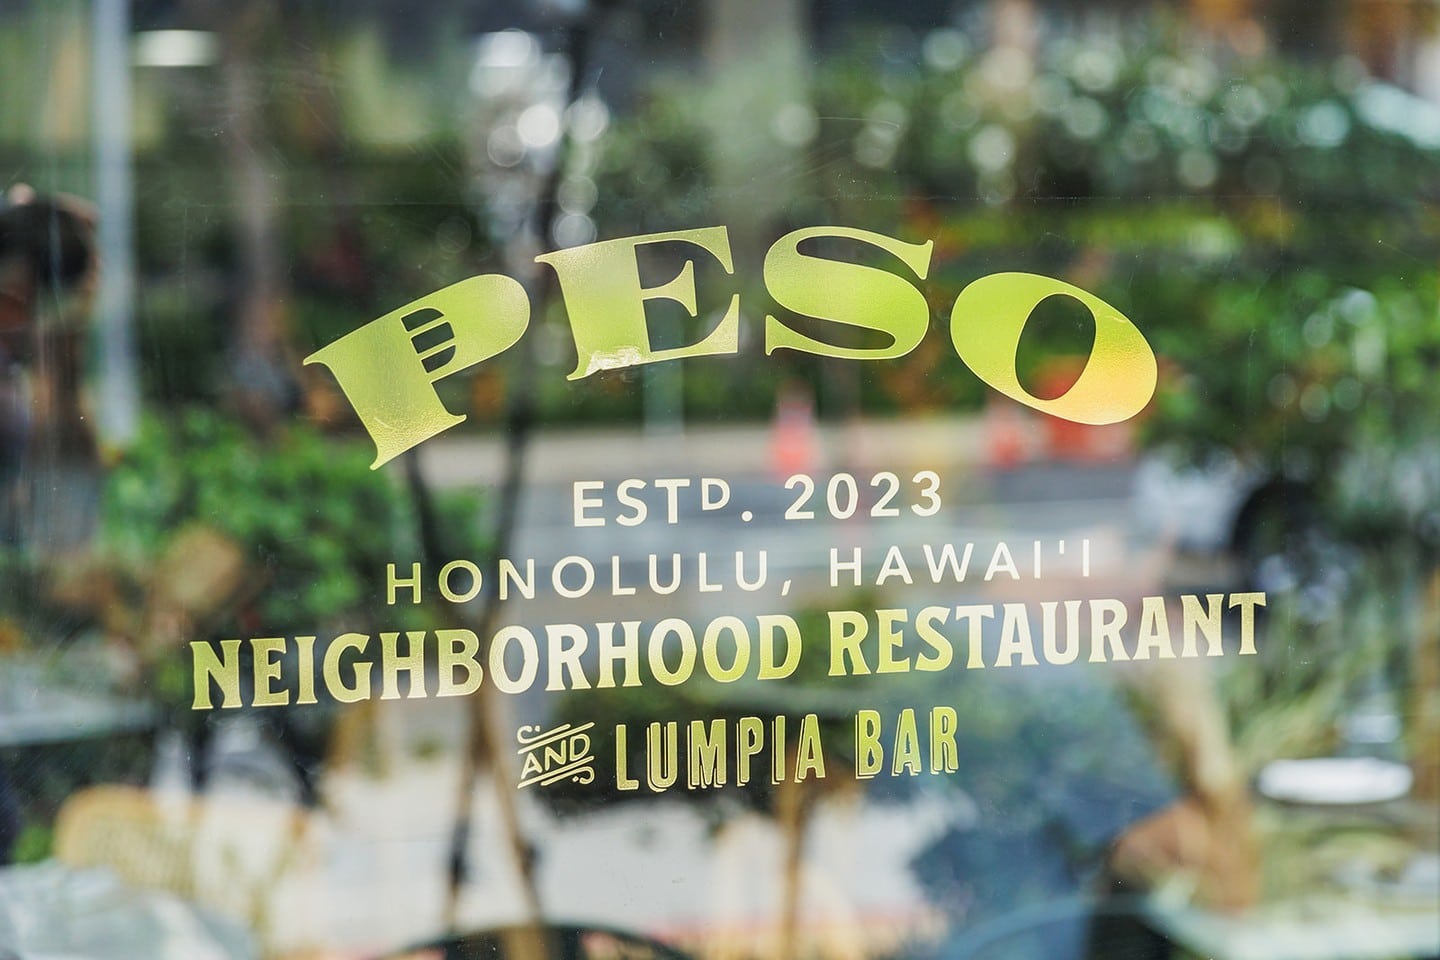 Enjoy a meal at @pesoneighborhood this week! Now open for lunch and brunch, featuring delicious new menu items such as baon “bento”, fried chicken sandwiches, and chicken adobo french dip sandwiches.